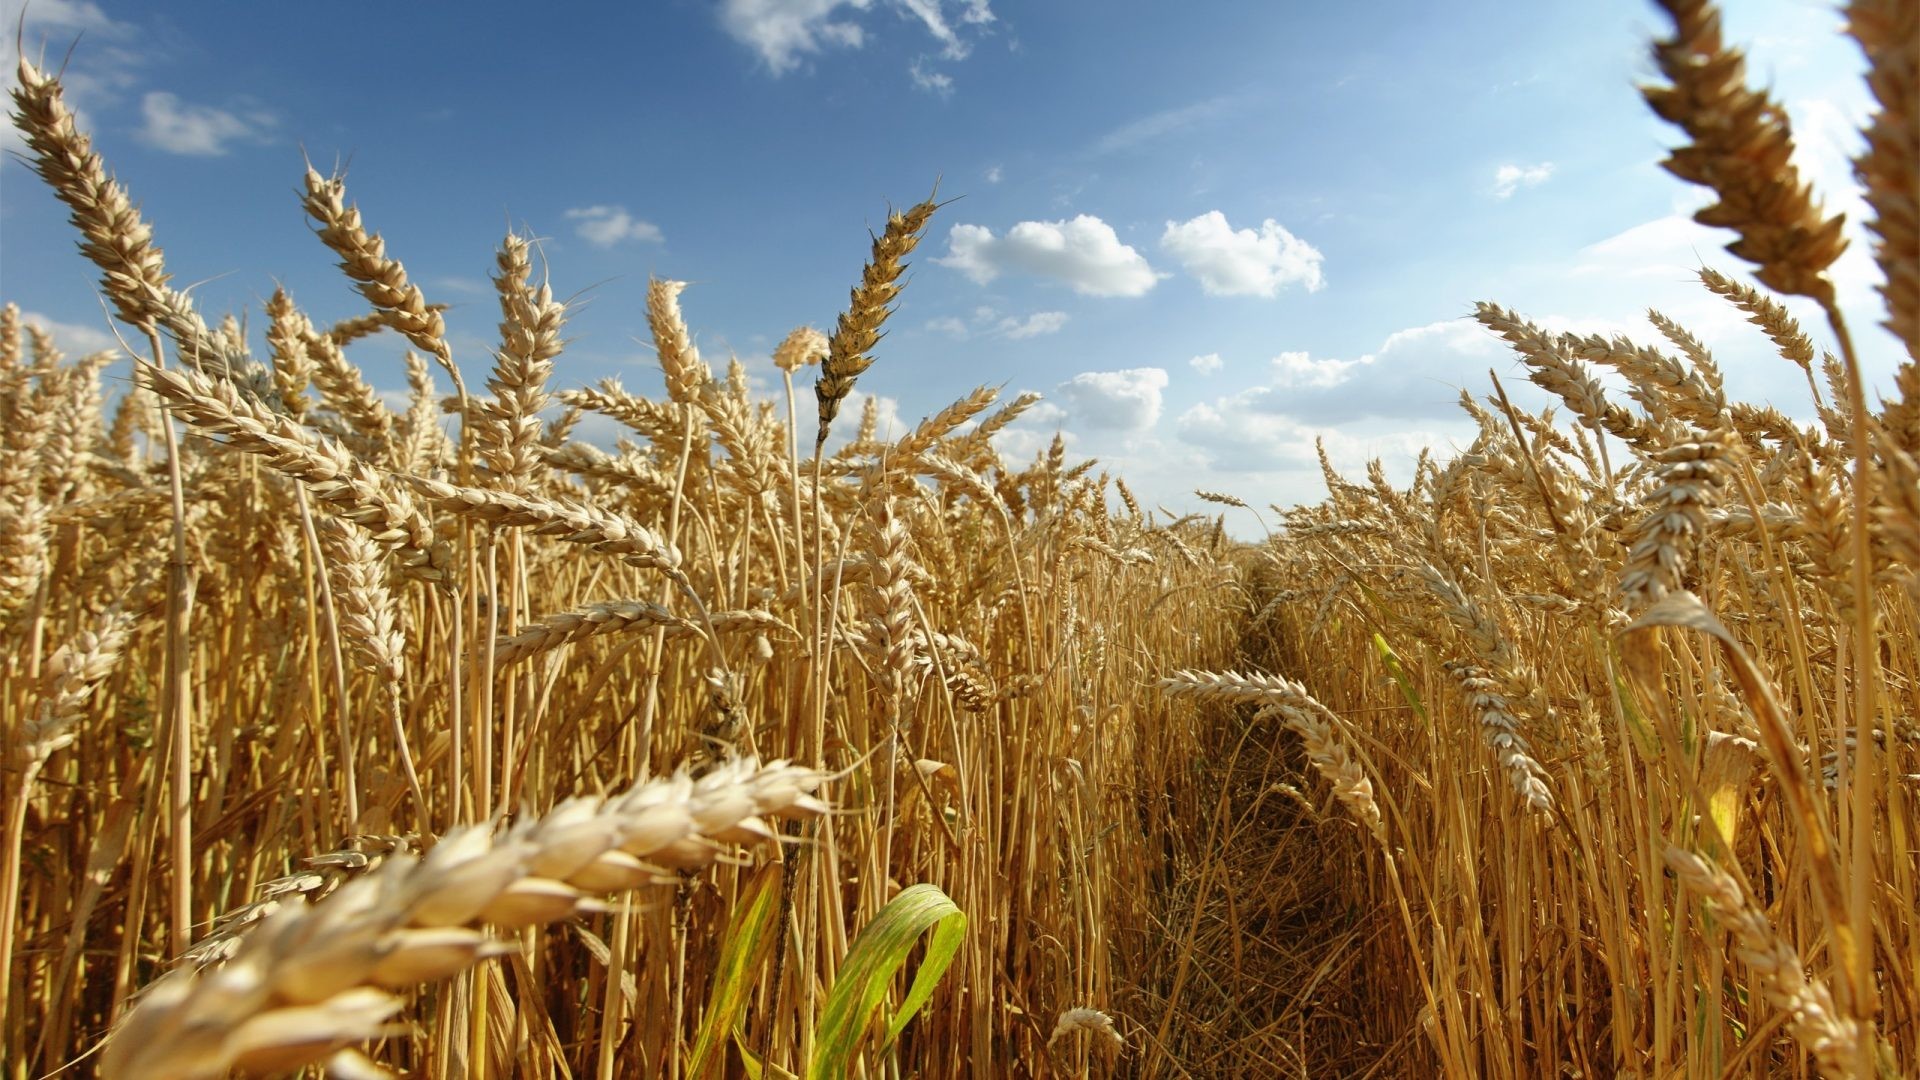 1920x1080 Grain Tag - Wheat Fields Grain Nature 1080p Picture for HD 16:9 High  Definition